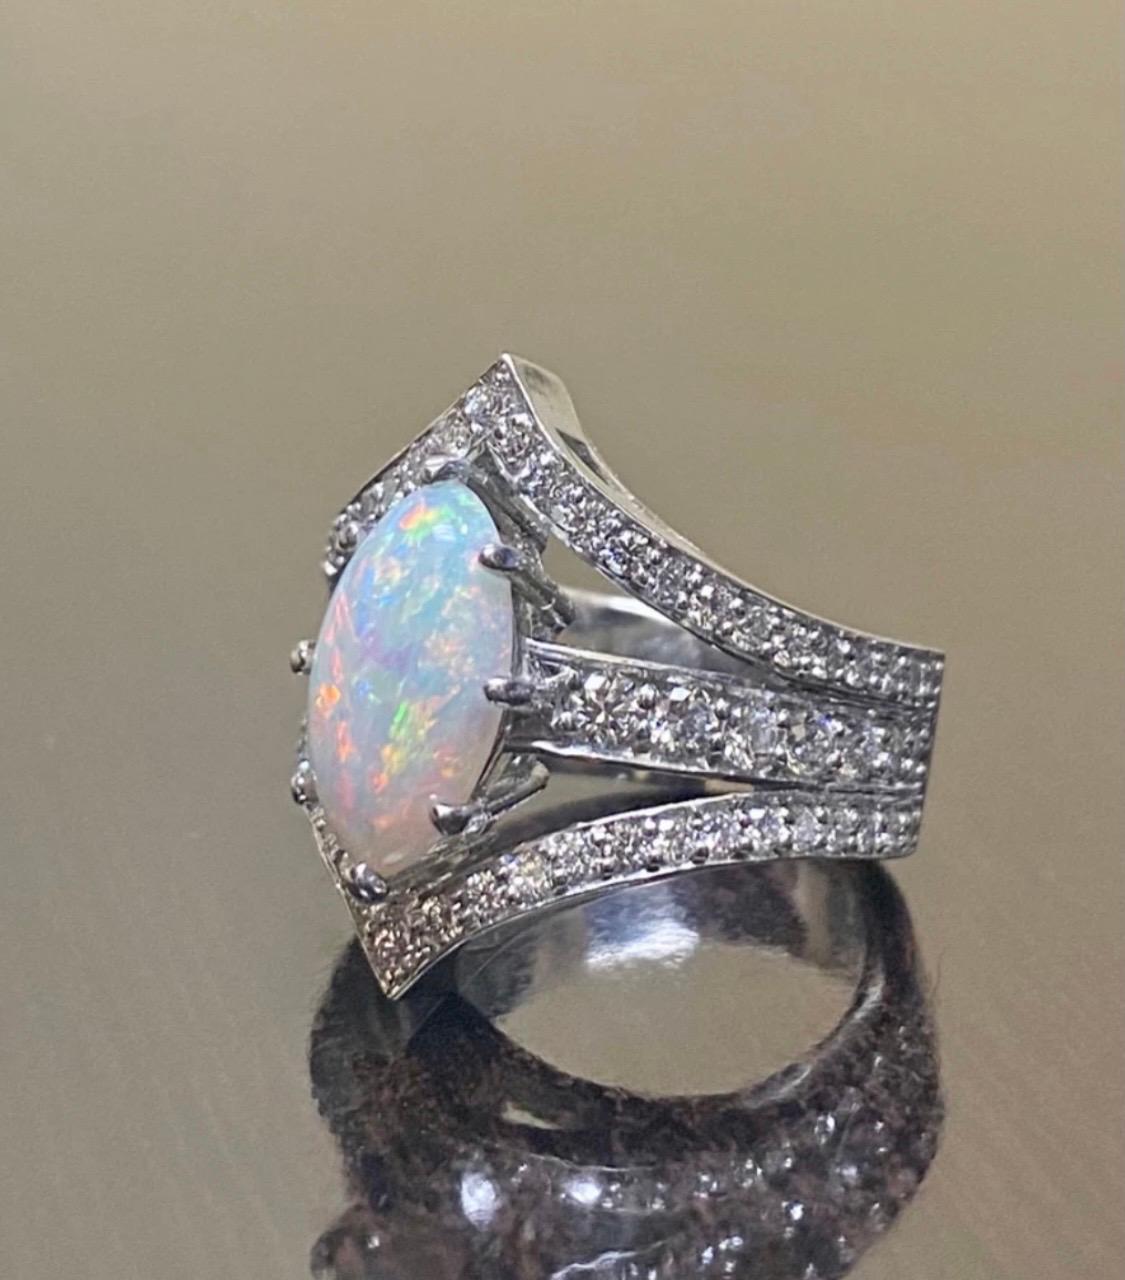 coober pedy opals for sale